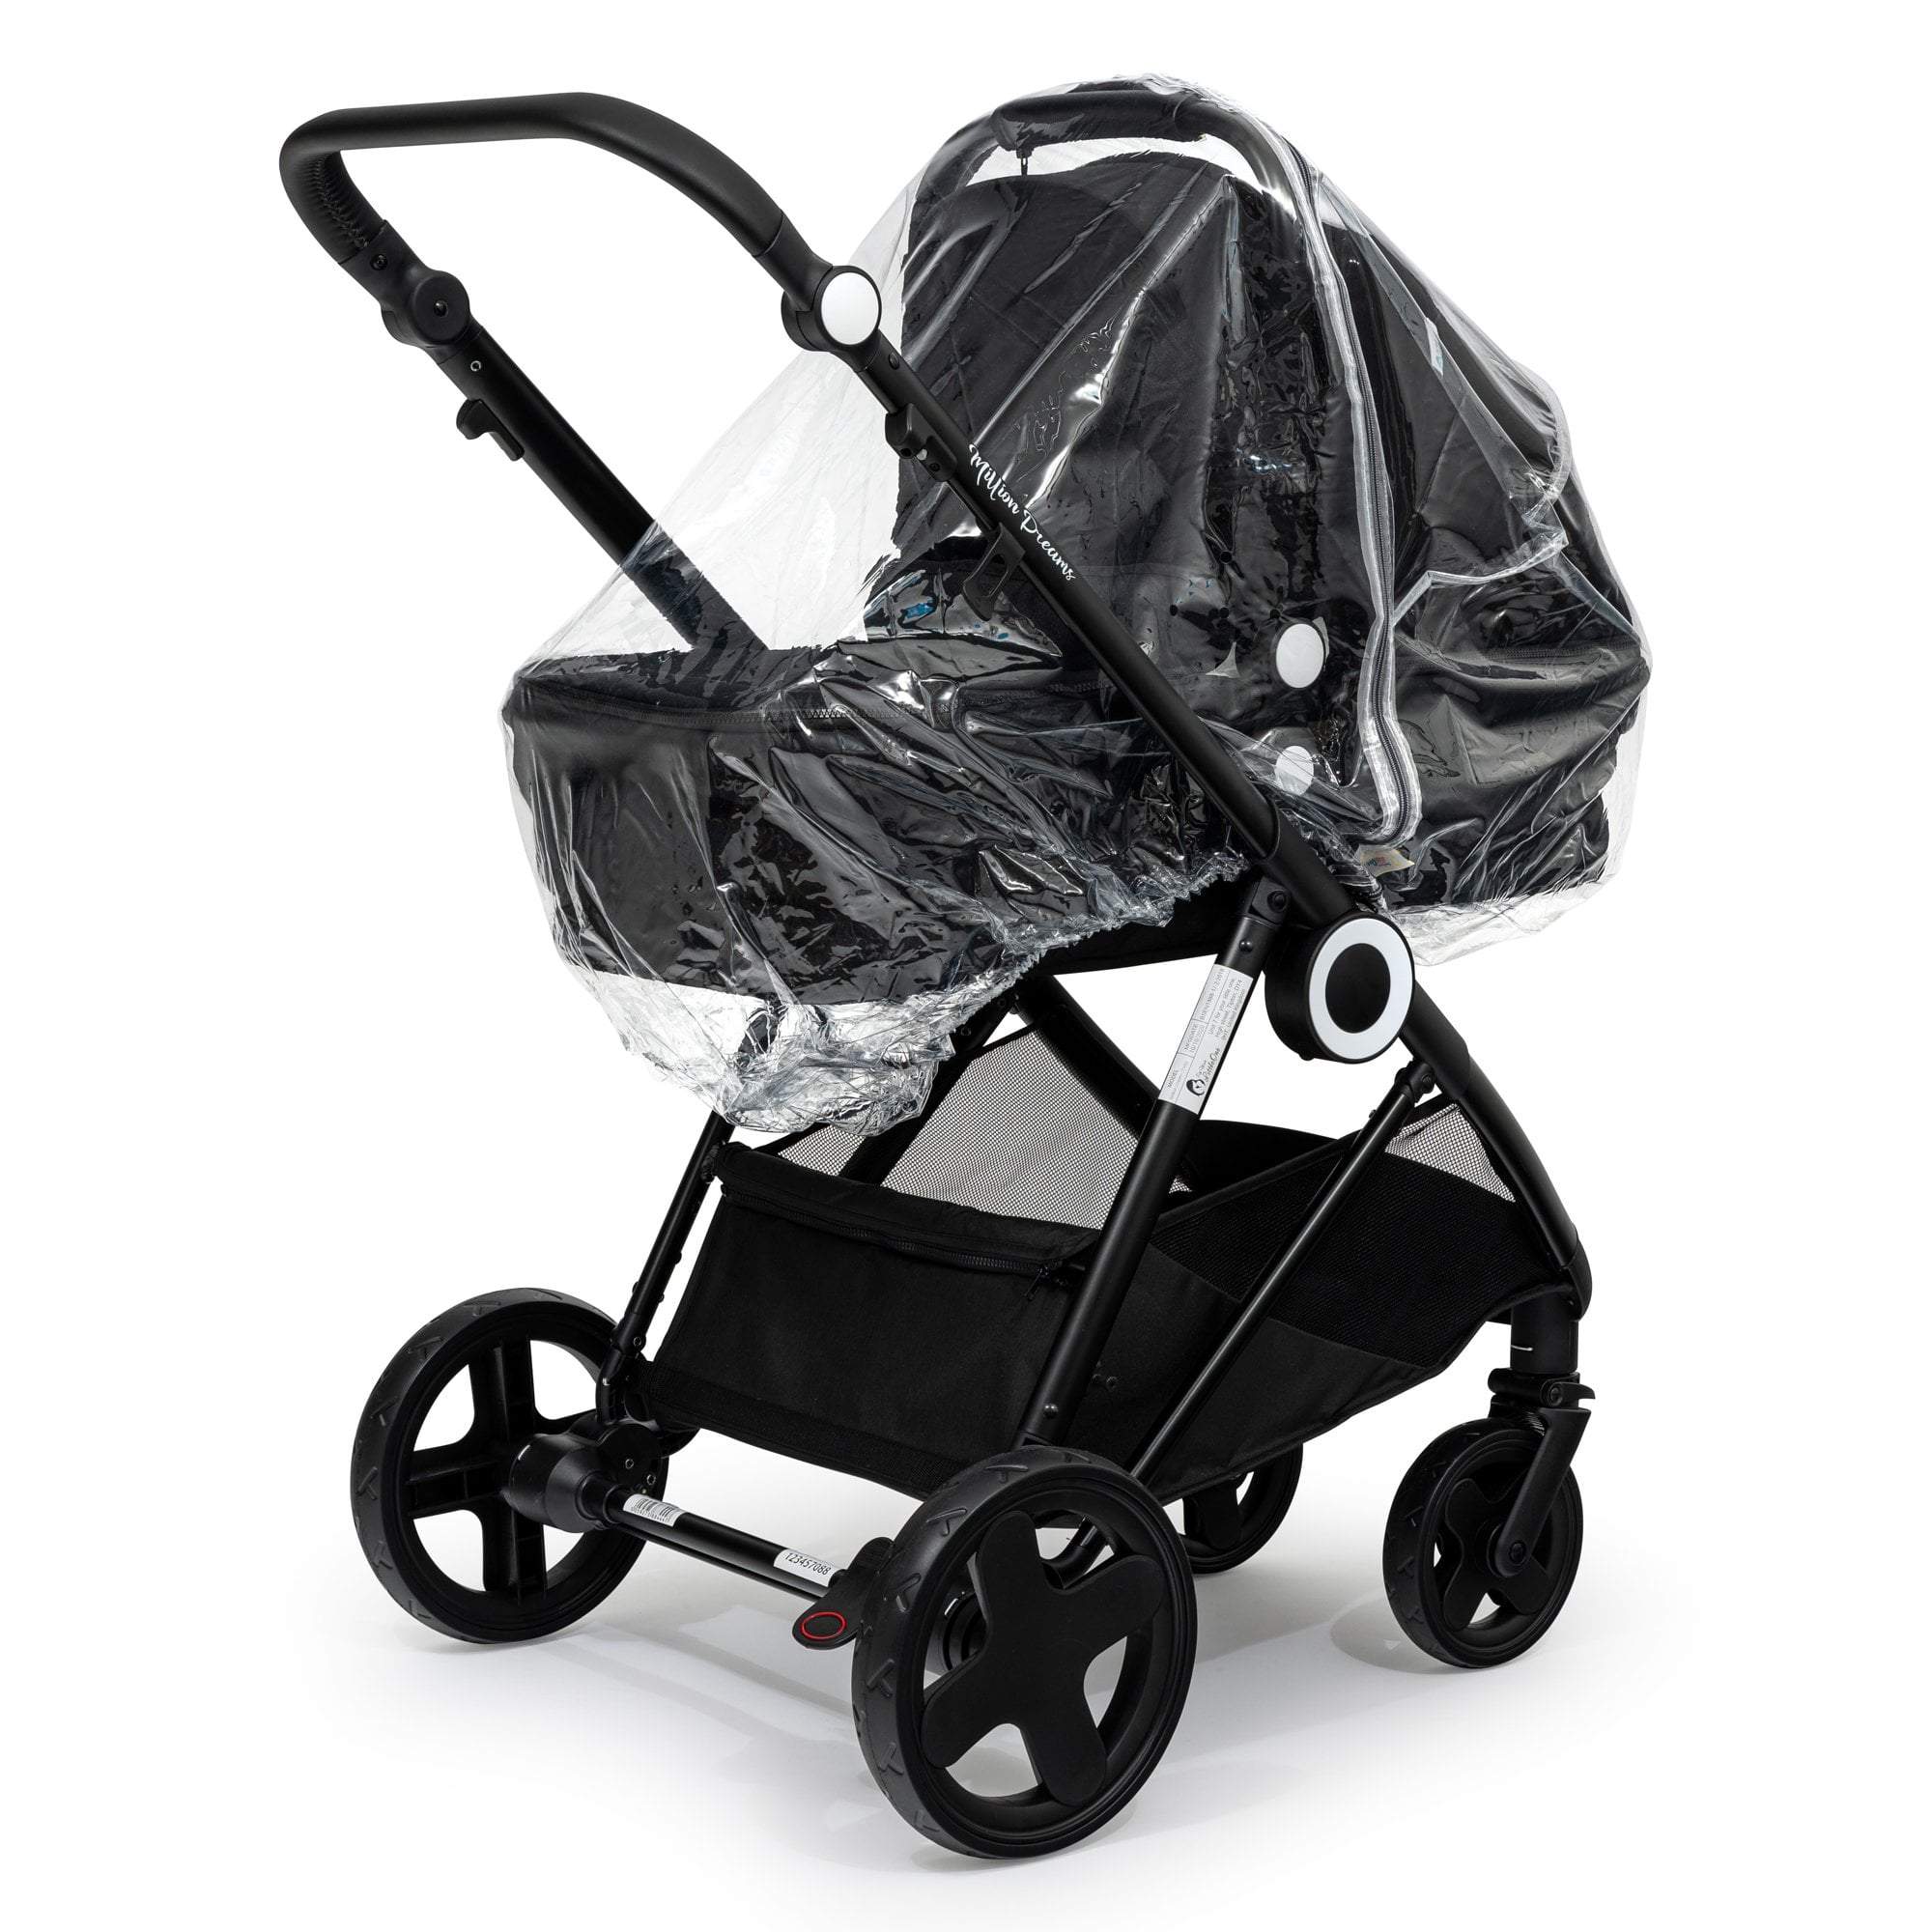 Carrycot Raincover Compatible With Koelstra - Fits All Models - For Your Little One